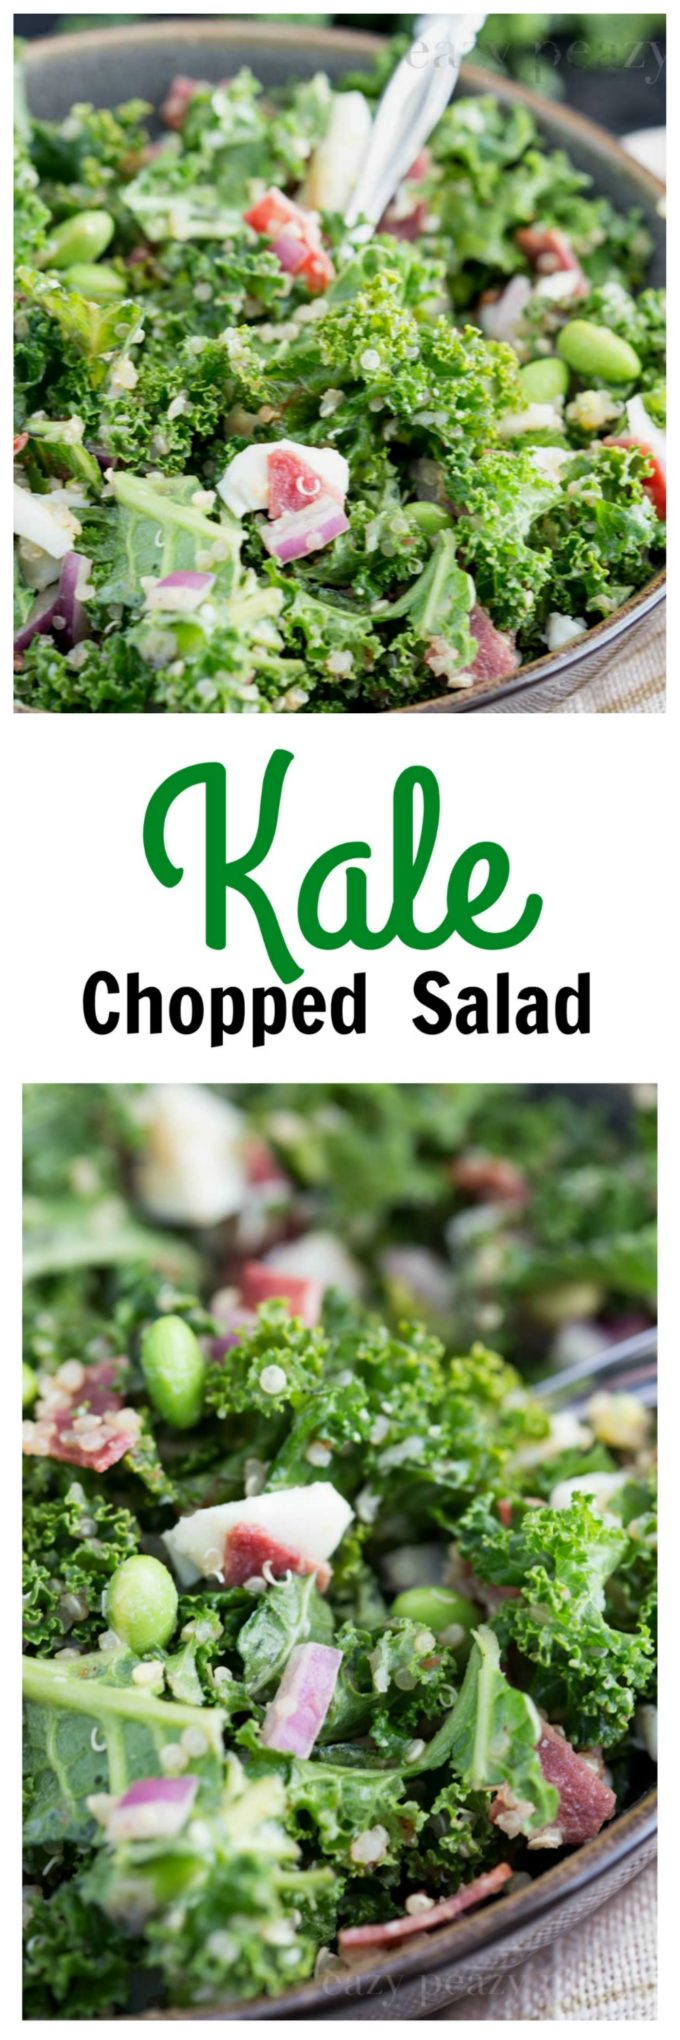 Kale Chopped Salad - Easy Peasy Meals